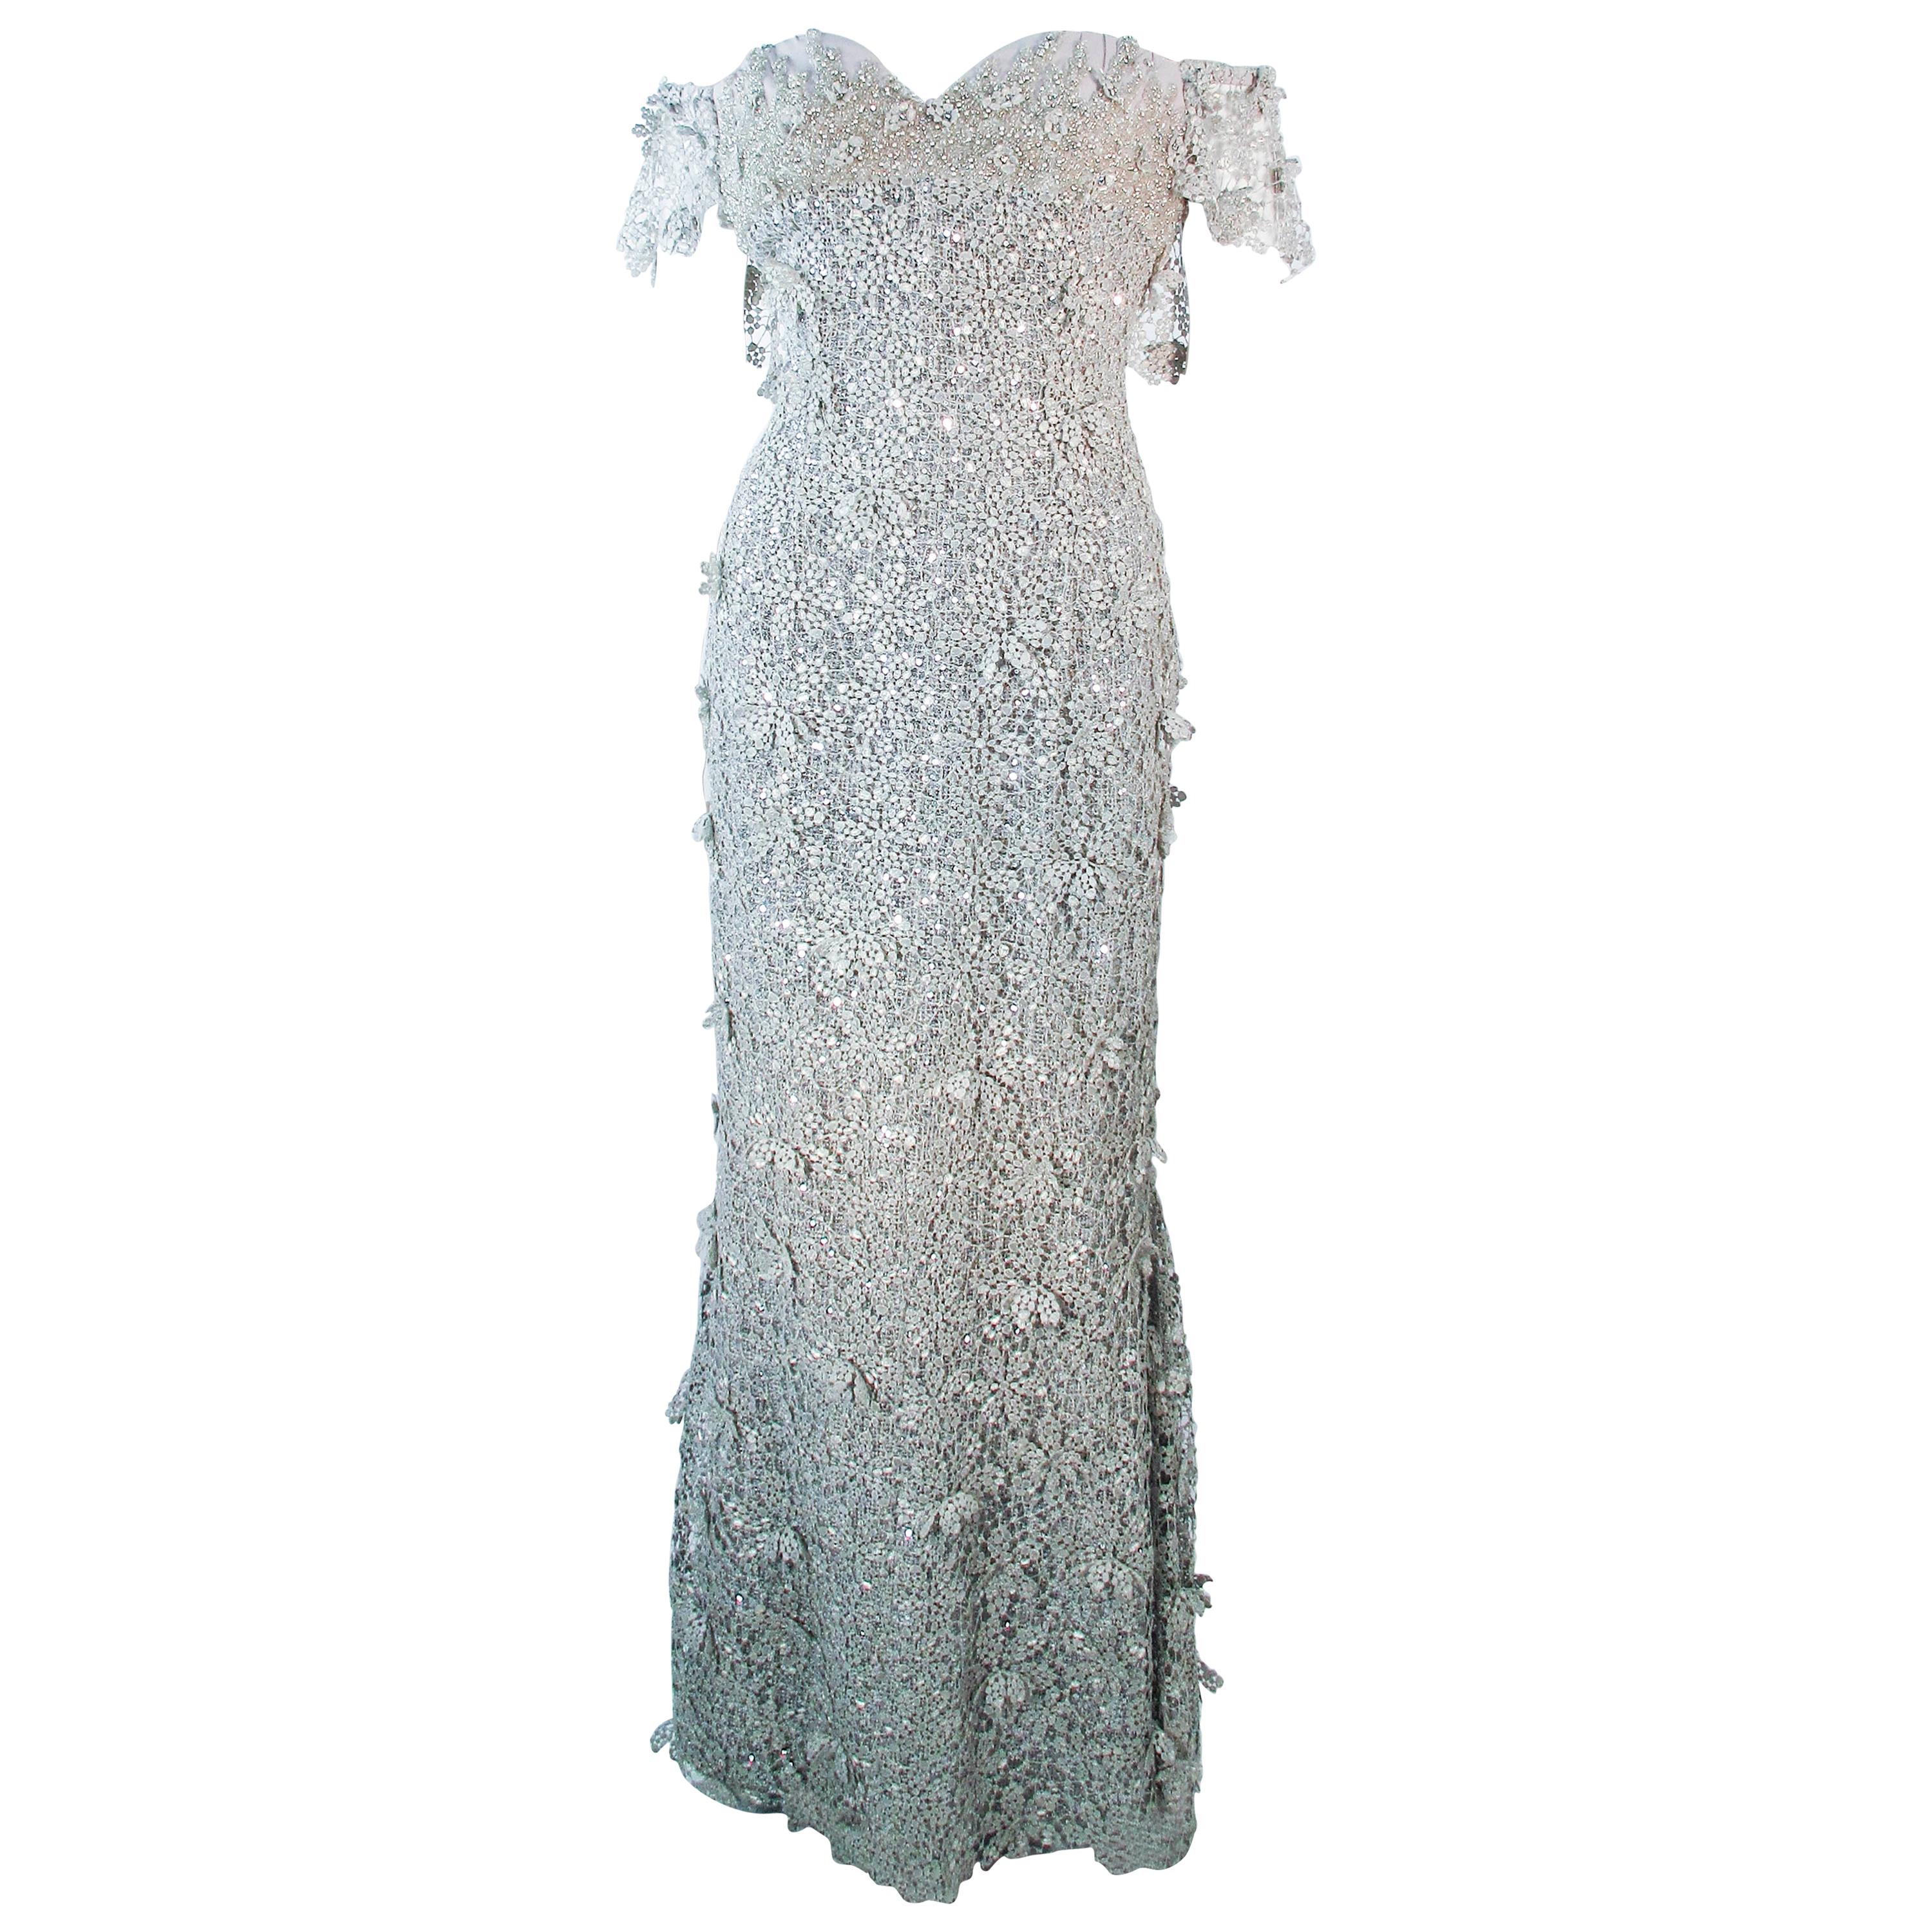 TONY WARD Silver Metallic Lace Gown Size 2 4 